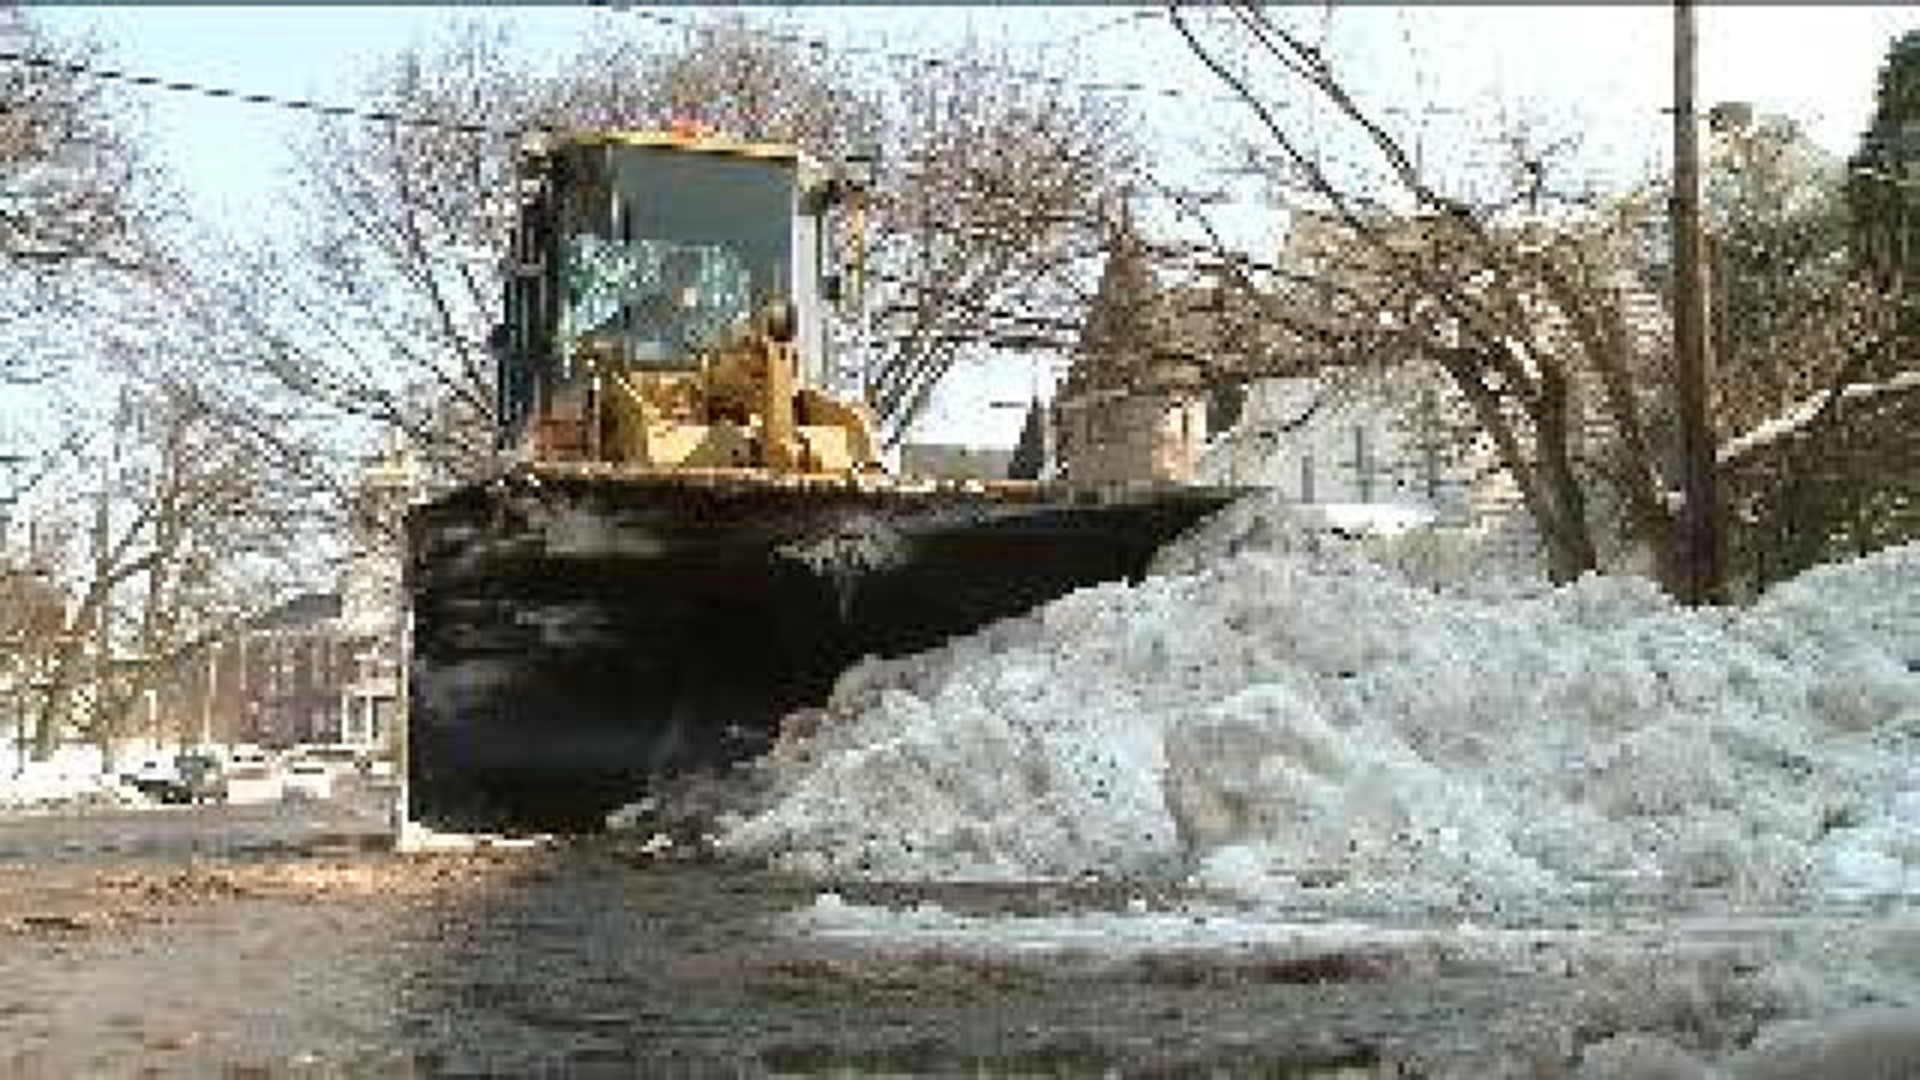 Catching Up on Clearing Snow In Bloomsburg